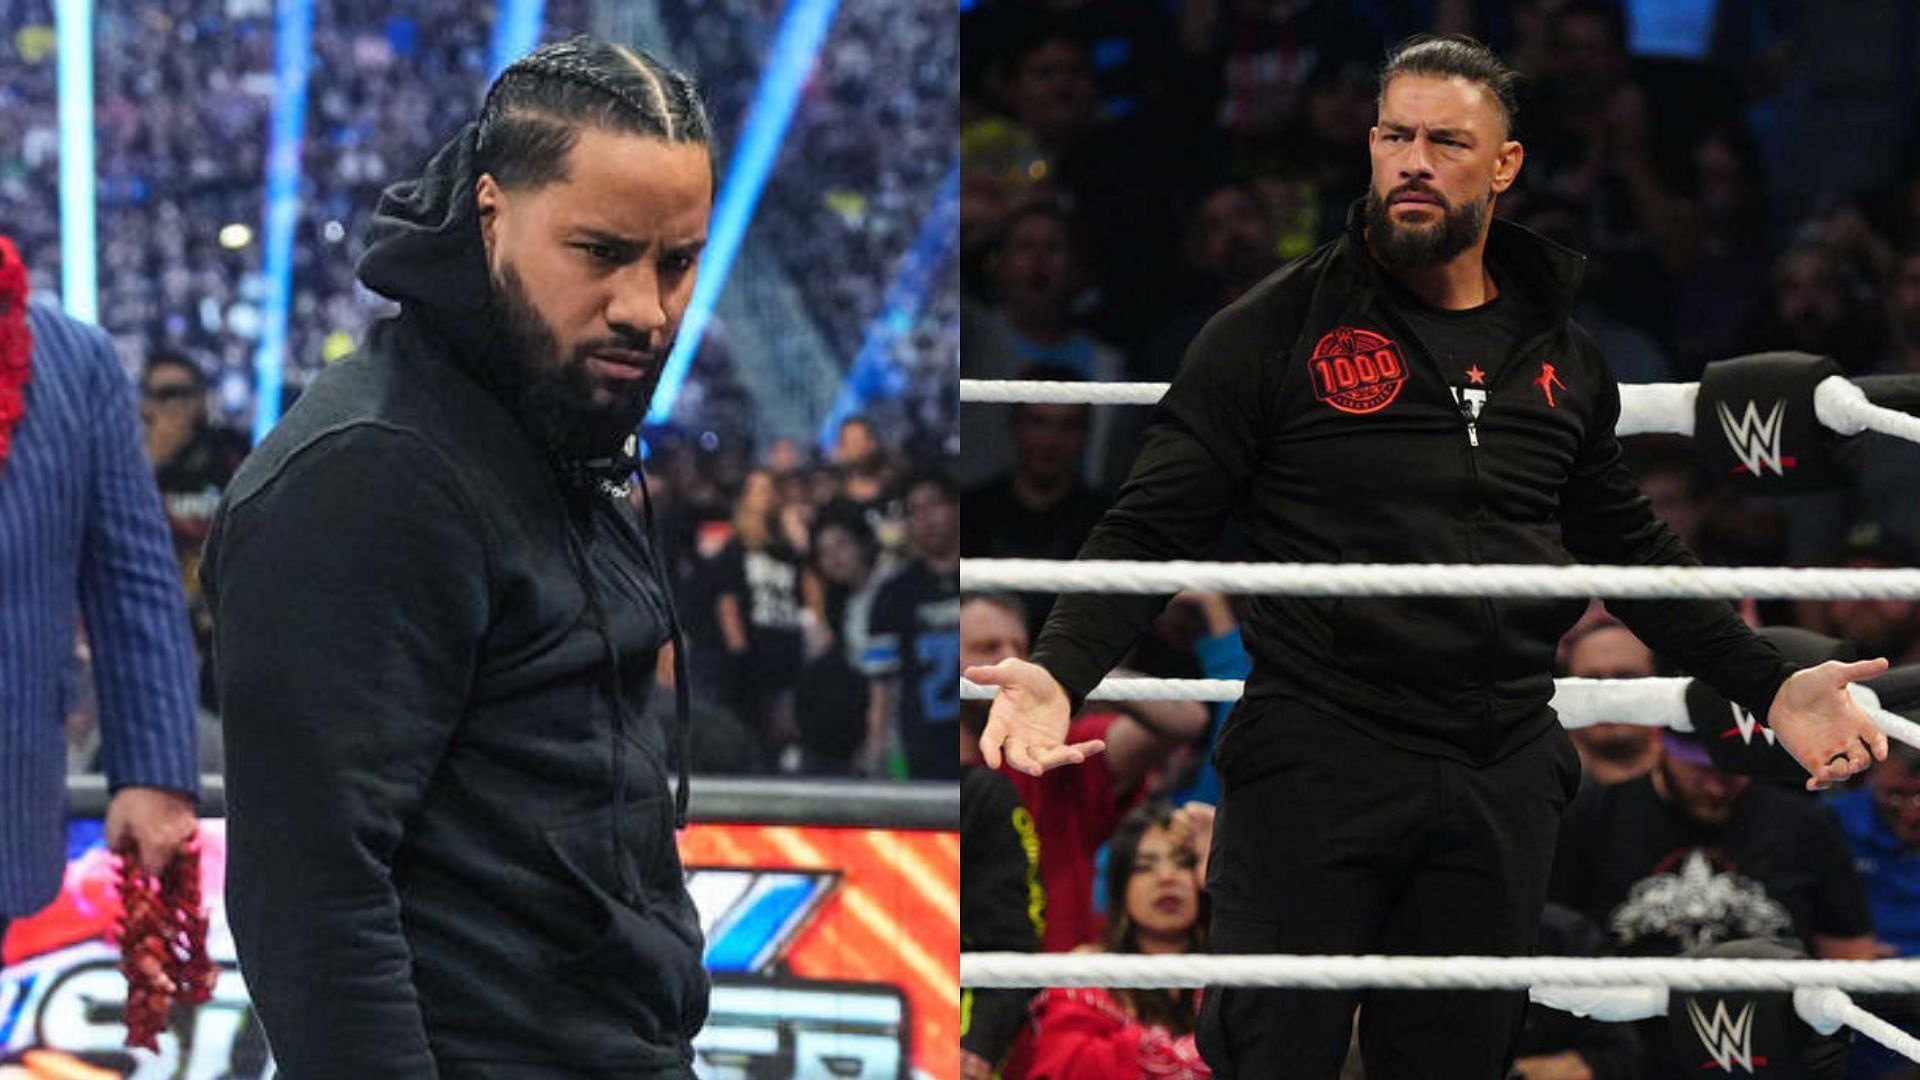 Jimmy Uso gets new merch ahead of Roman Reigns' return to WWE SmackDown